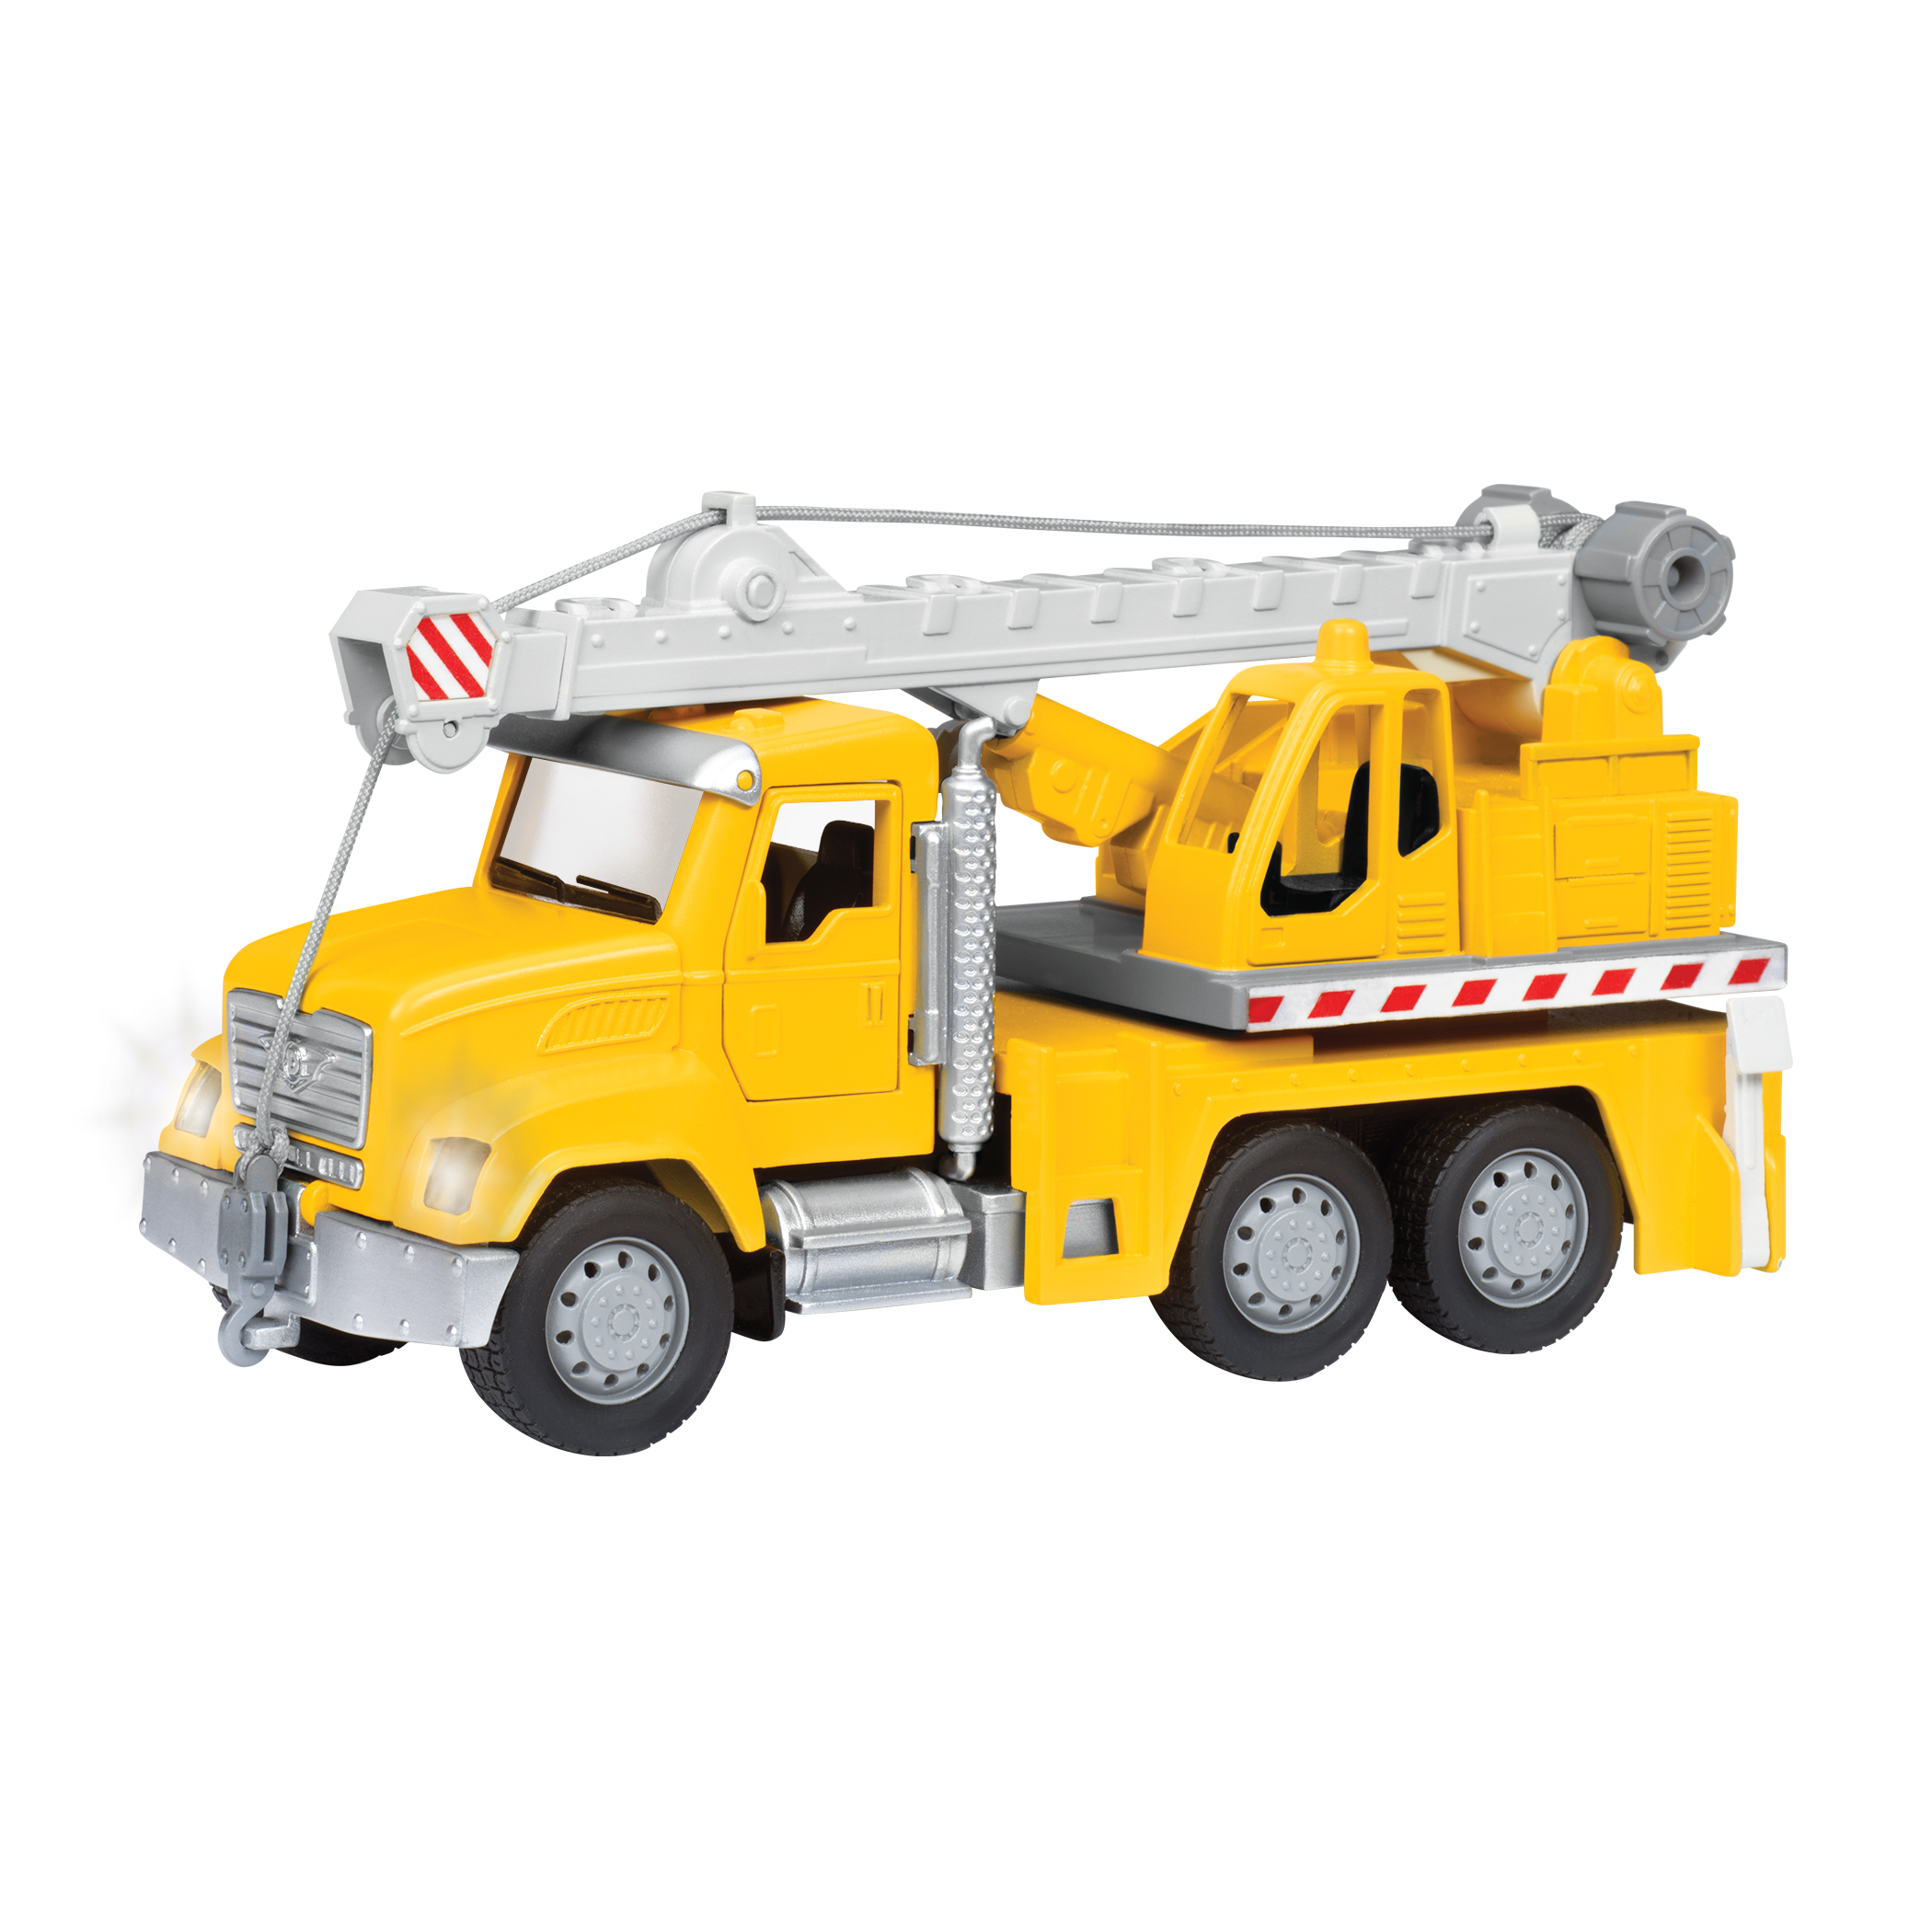 Micro Crane Truck | Toy Trucks & Construction Toys for Kids